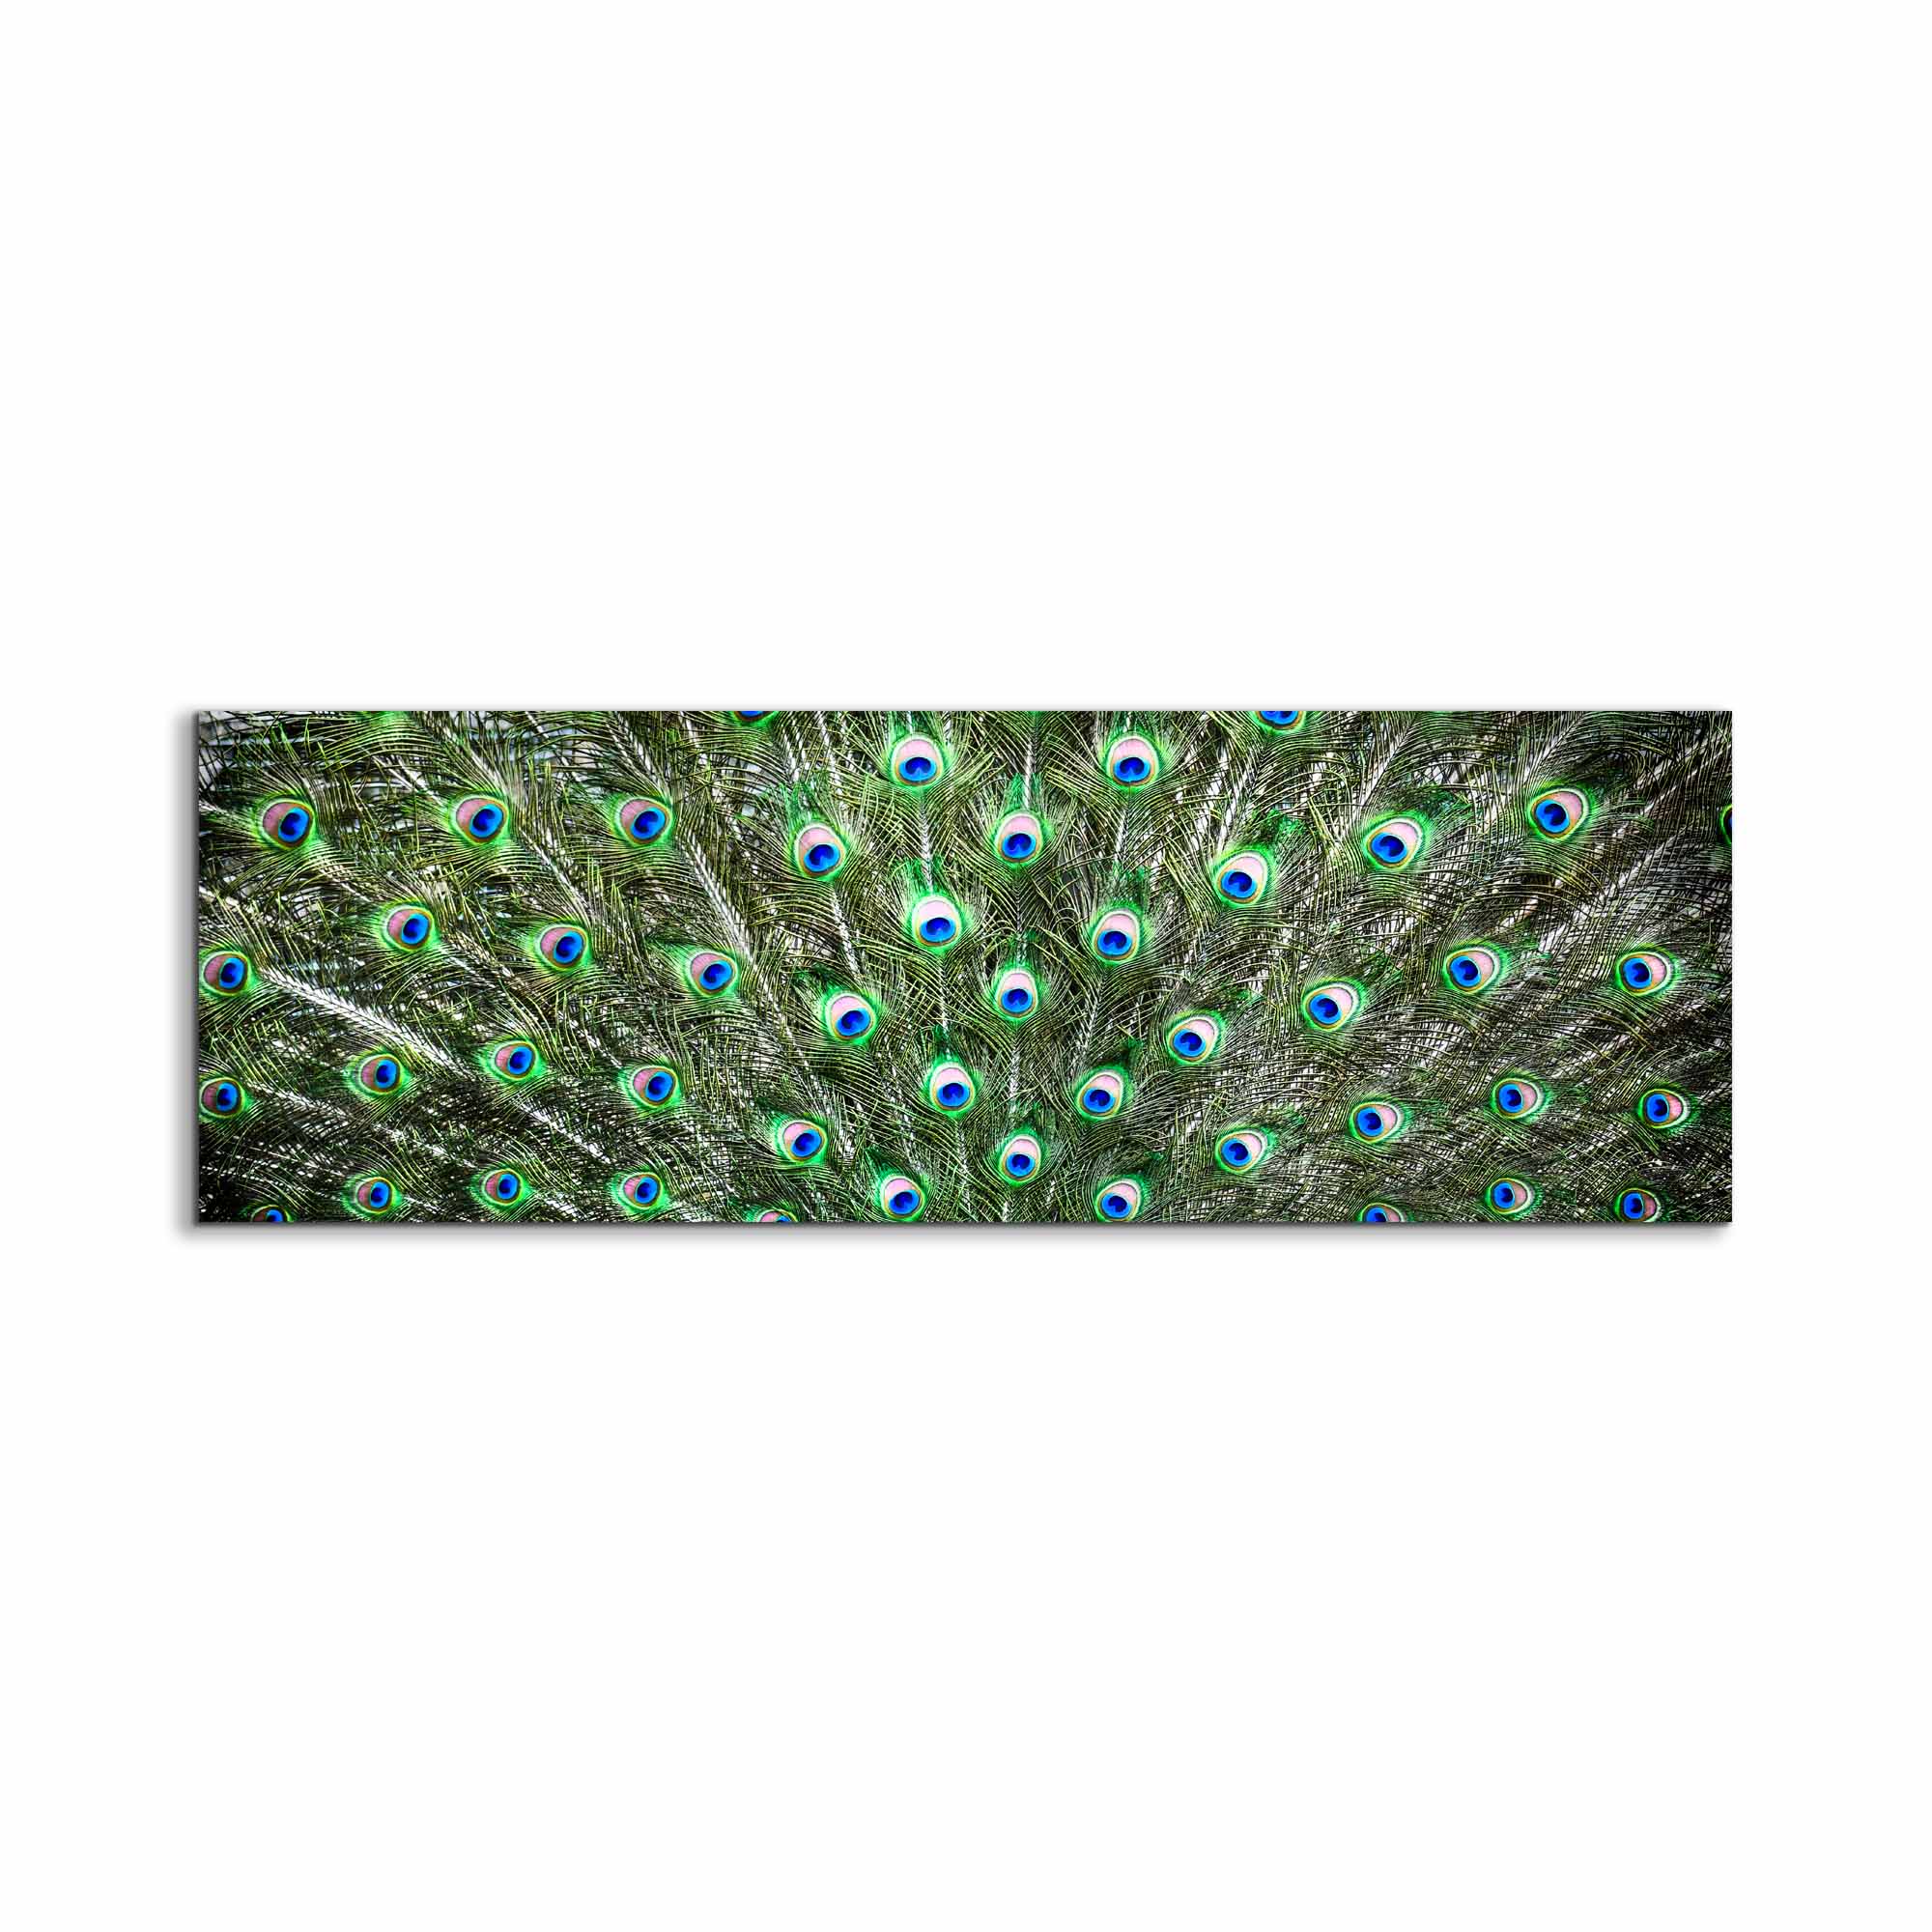 Peacock Feathers Canvas Art 72" x 24"